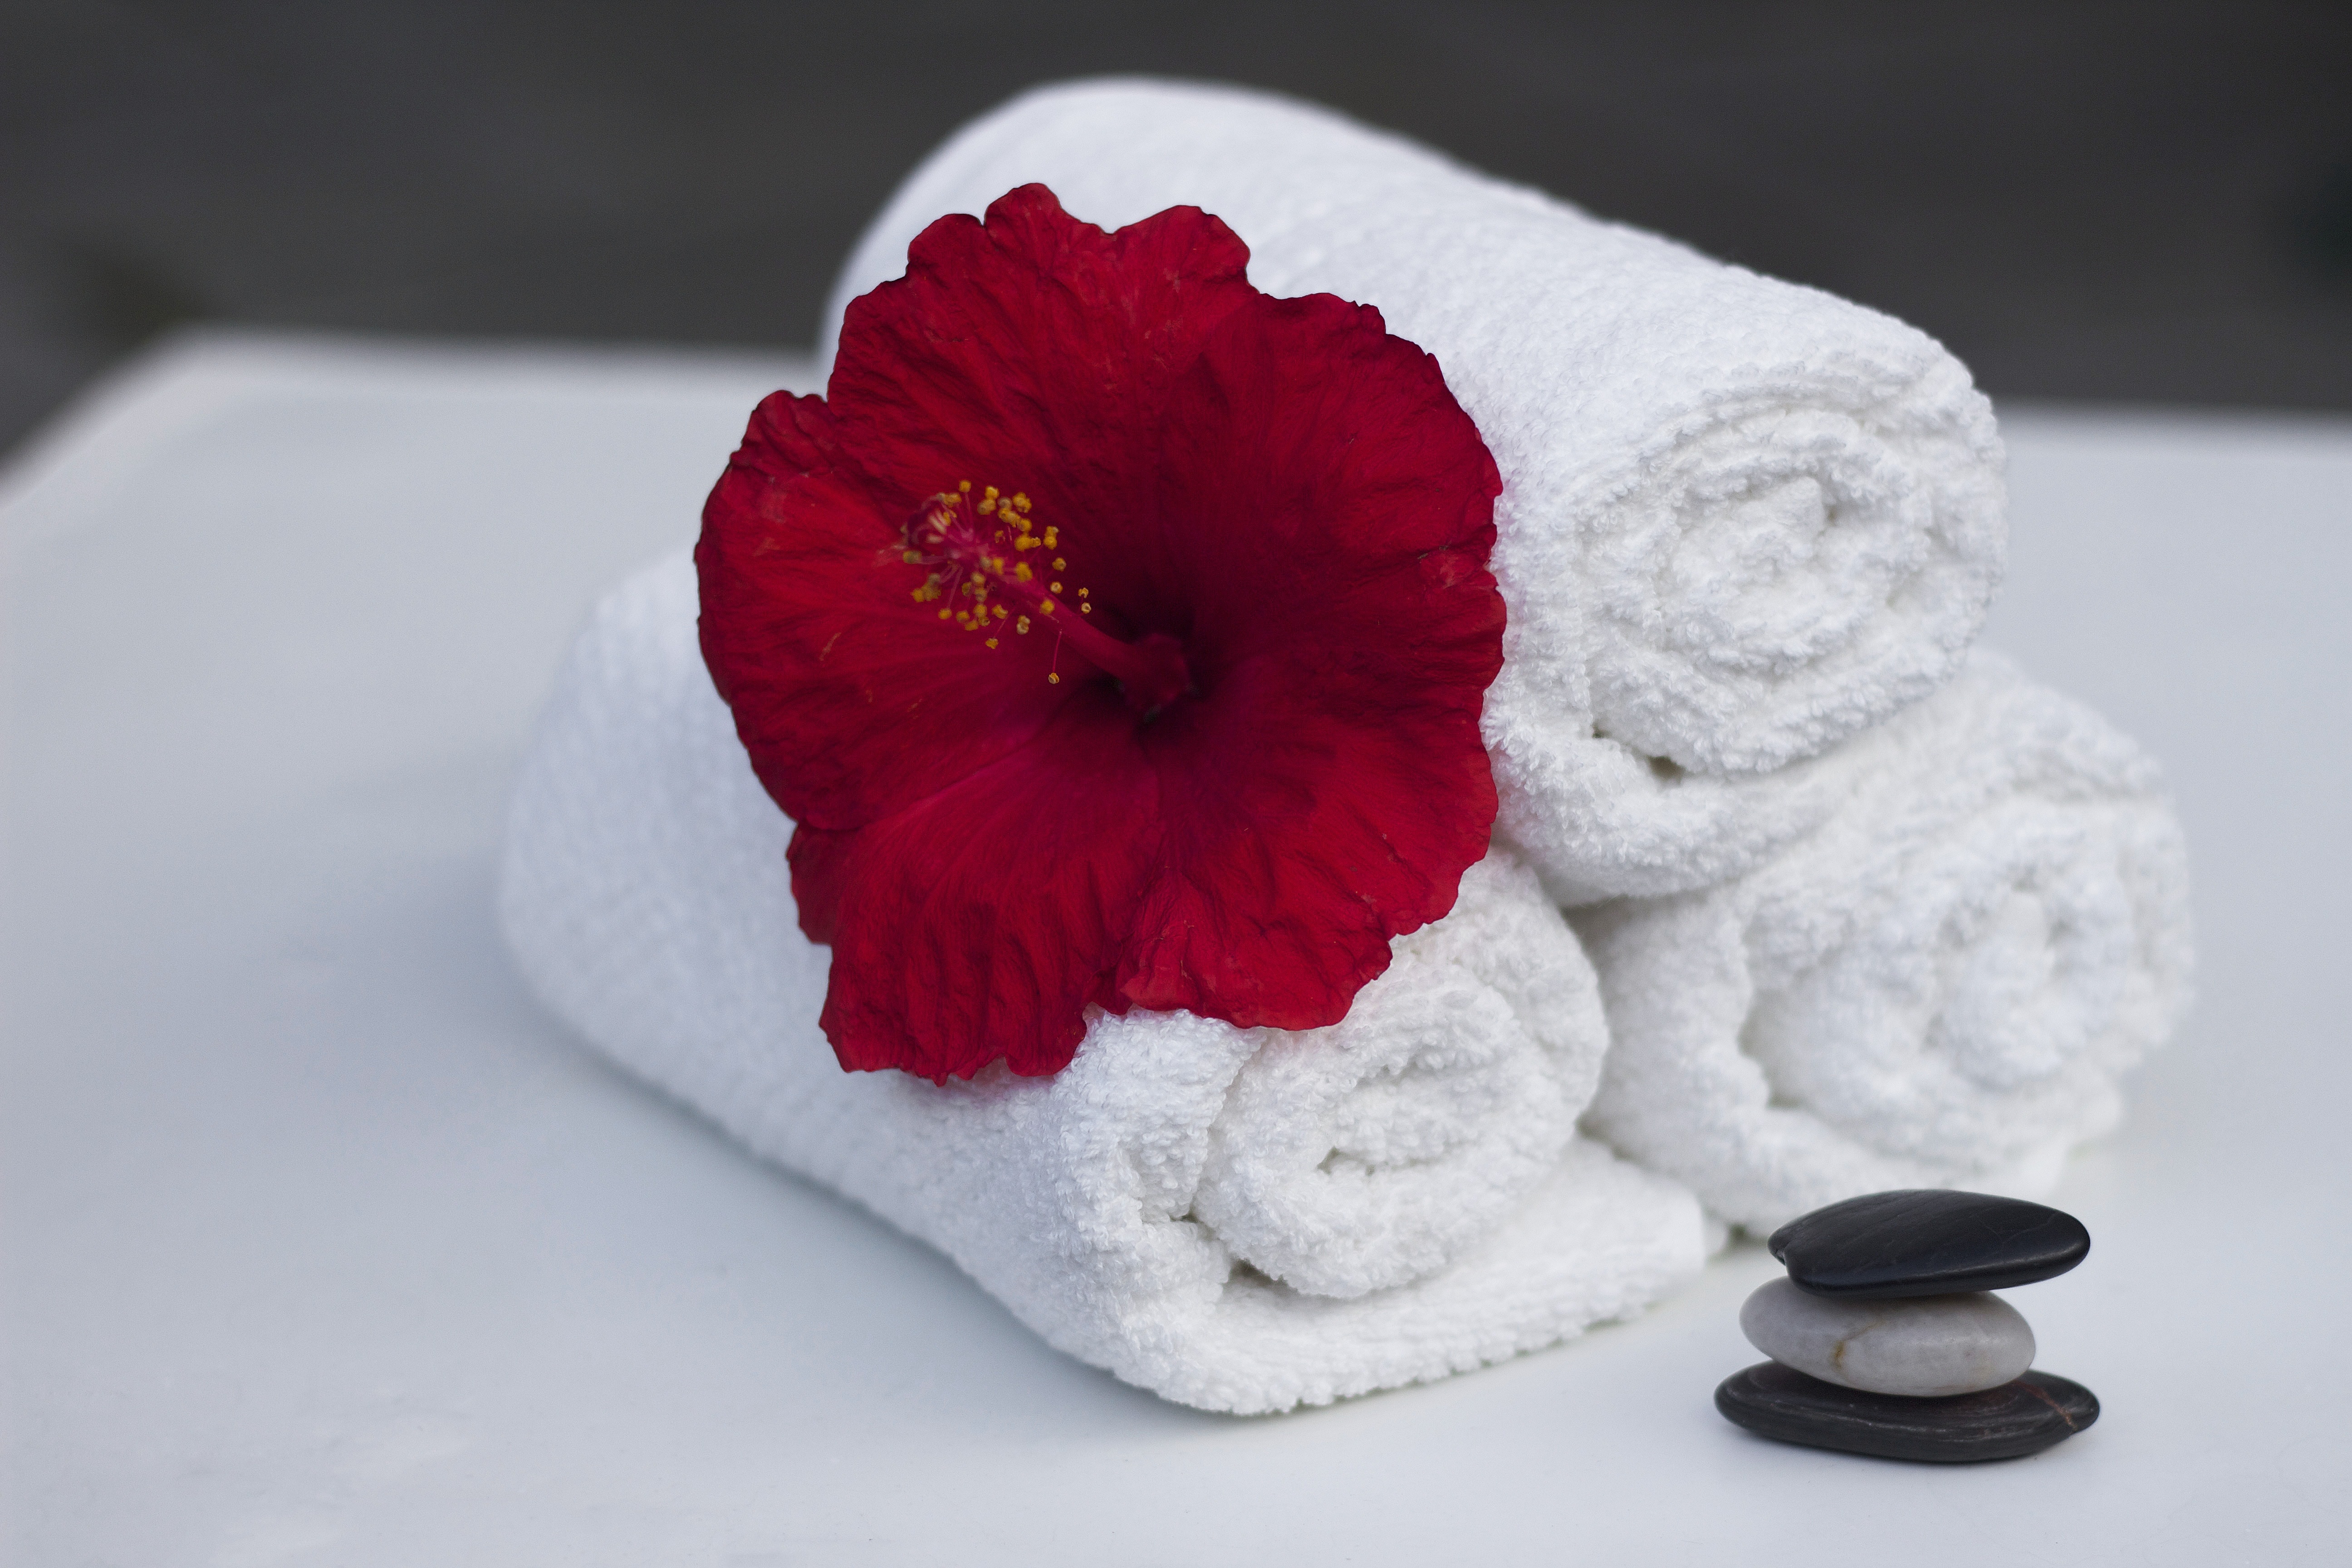 Spa, Clean, Hibiscus, Care, Towel, Salon, red, white color